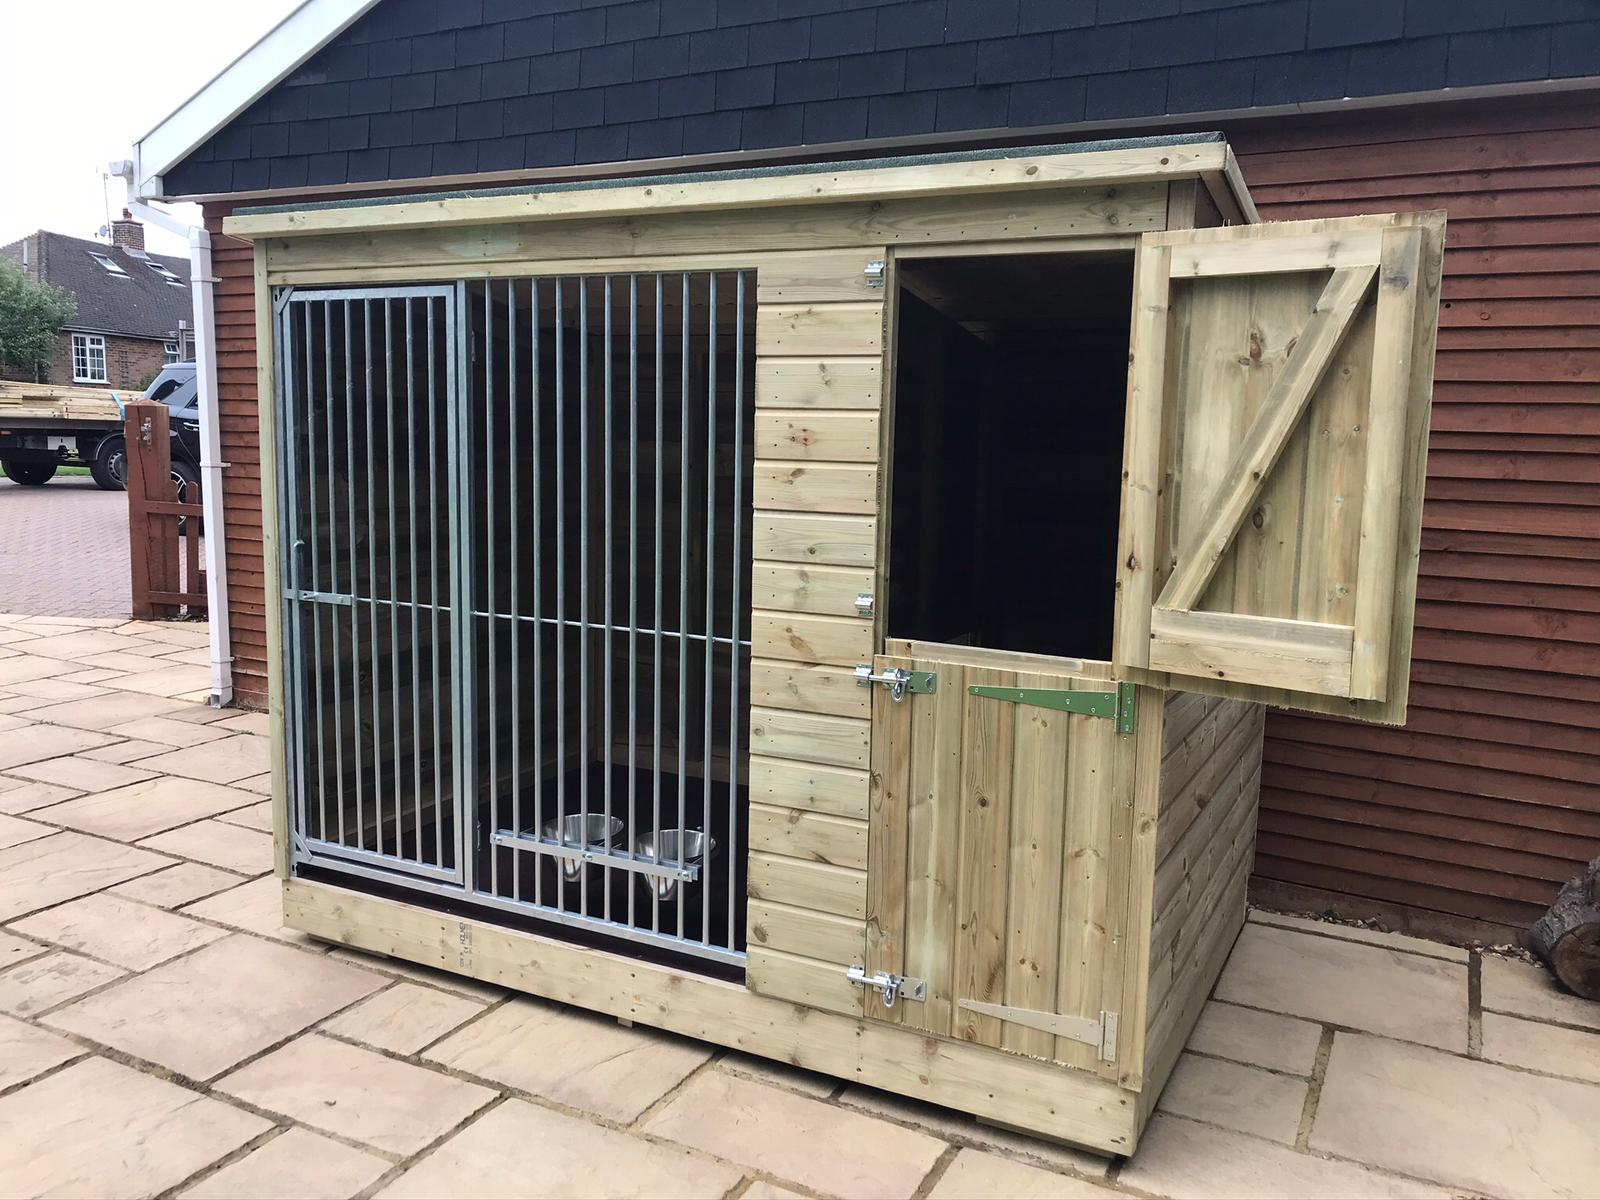 Chesterfield Wooden Dog Kennel And Run 8ft (wide) x 6ft (depth) x 5'11ft (high)